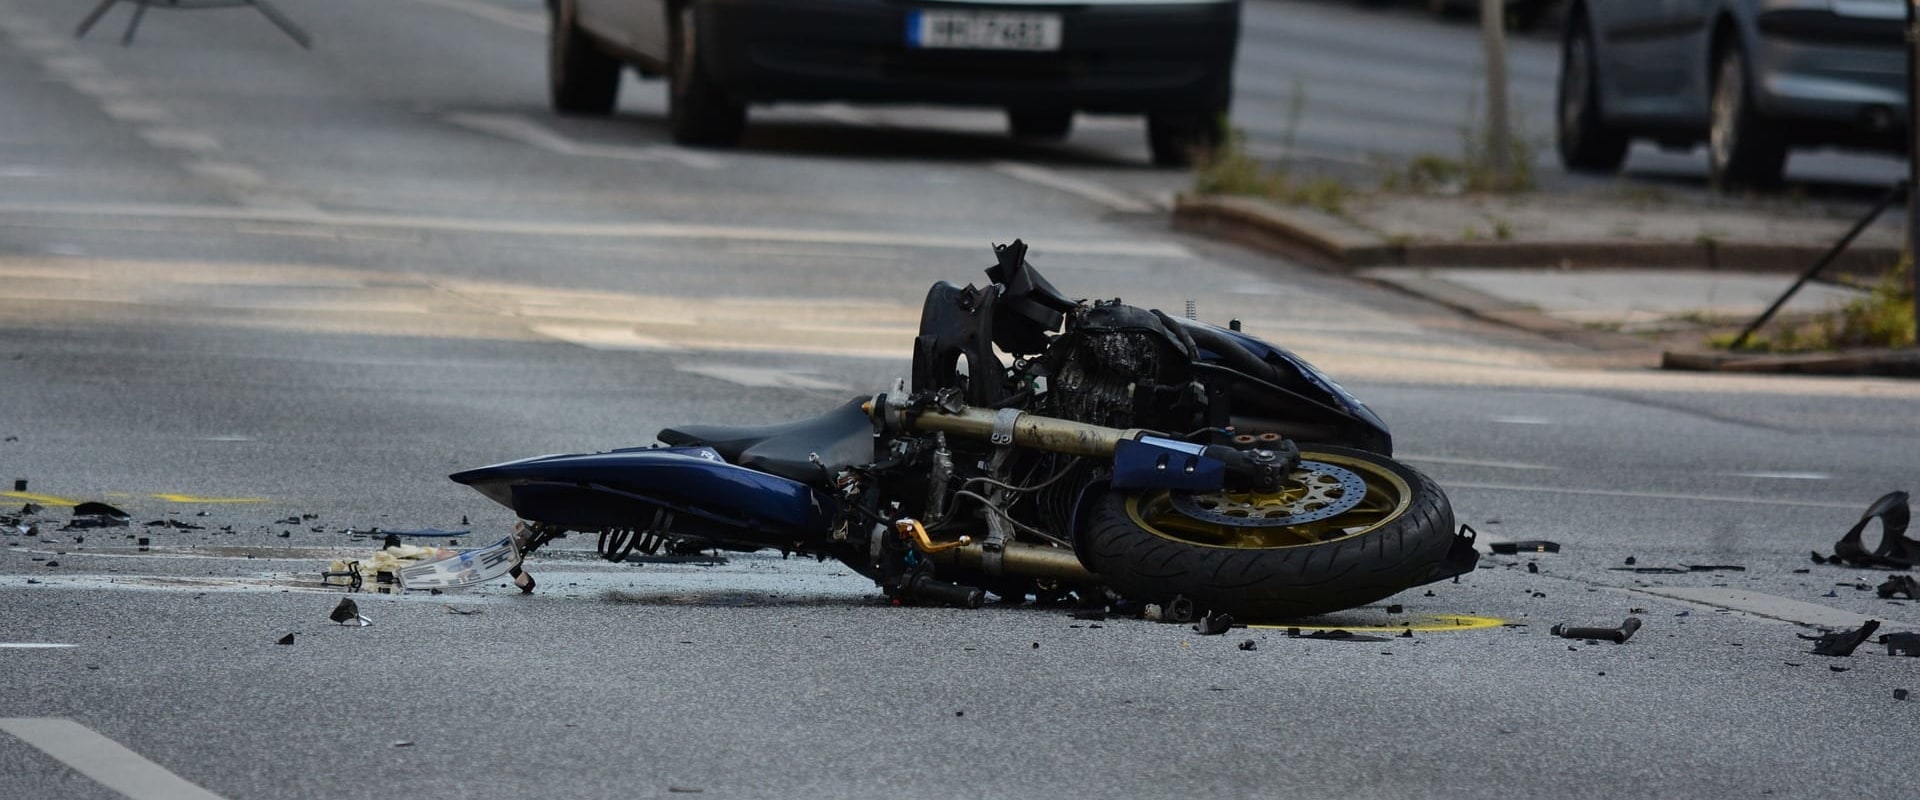 Can a motorcycle accident change your personality?